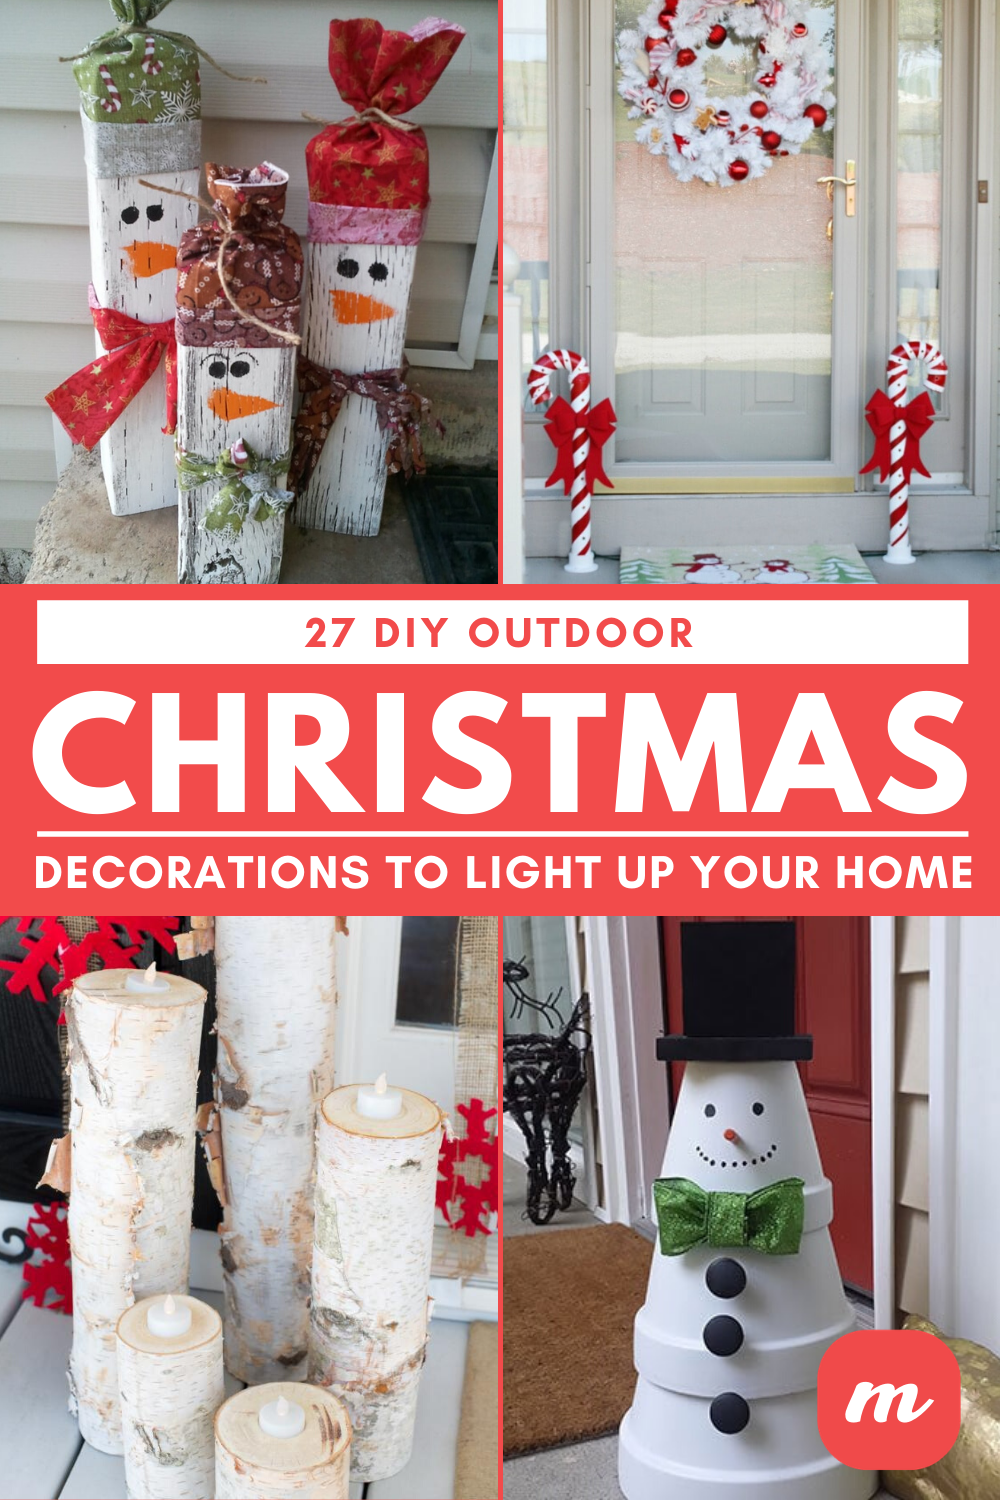 27 DIY Outdoor Christmas Decorations to Light Up Your Home -   19 xmas crafts decorations christmas lights ideas